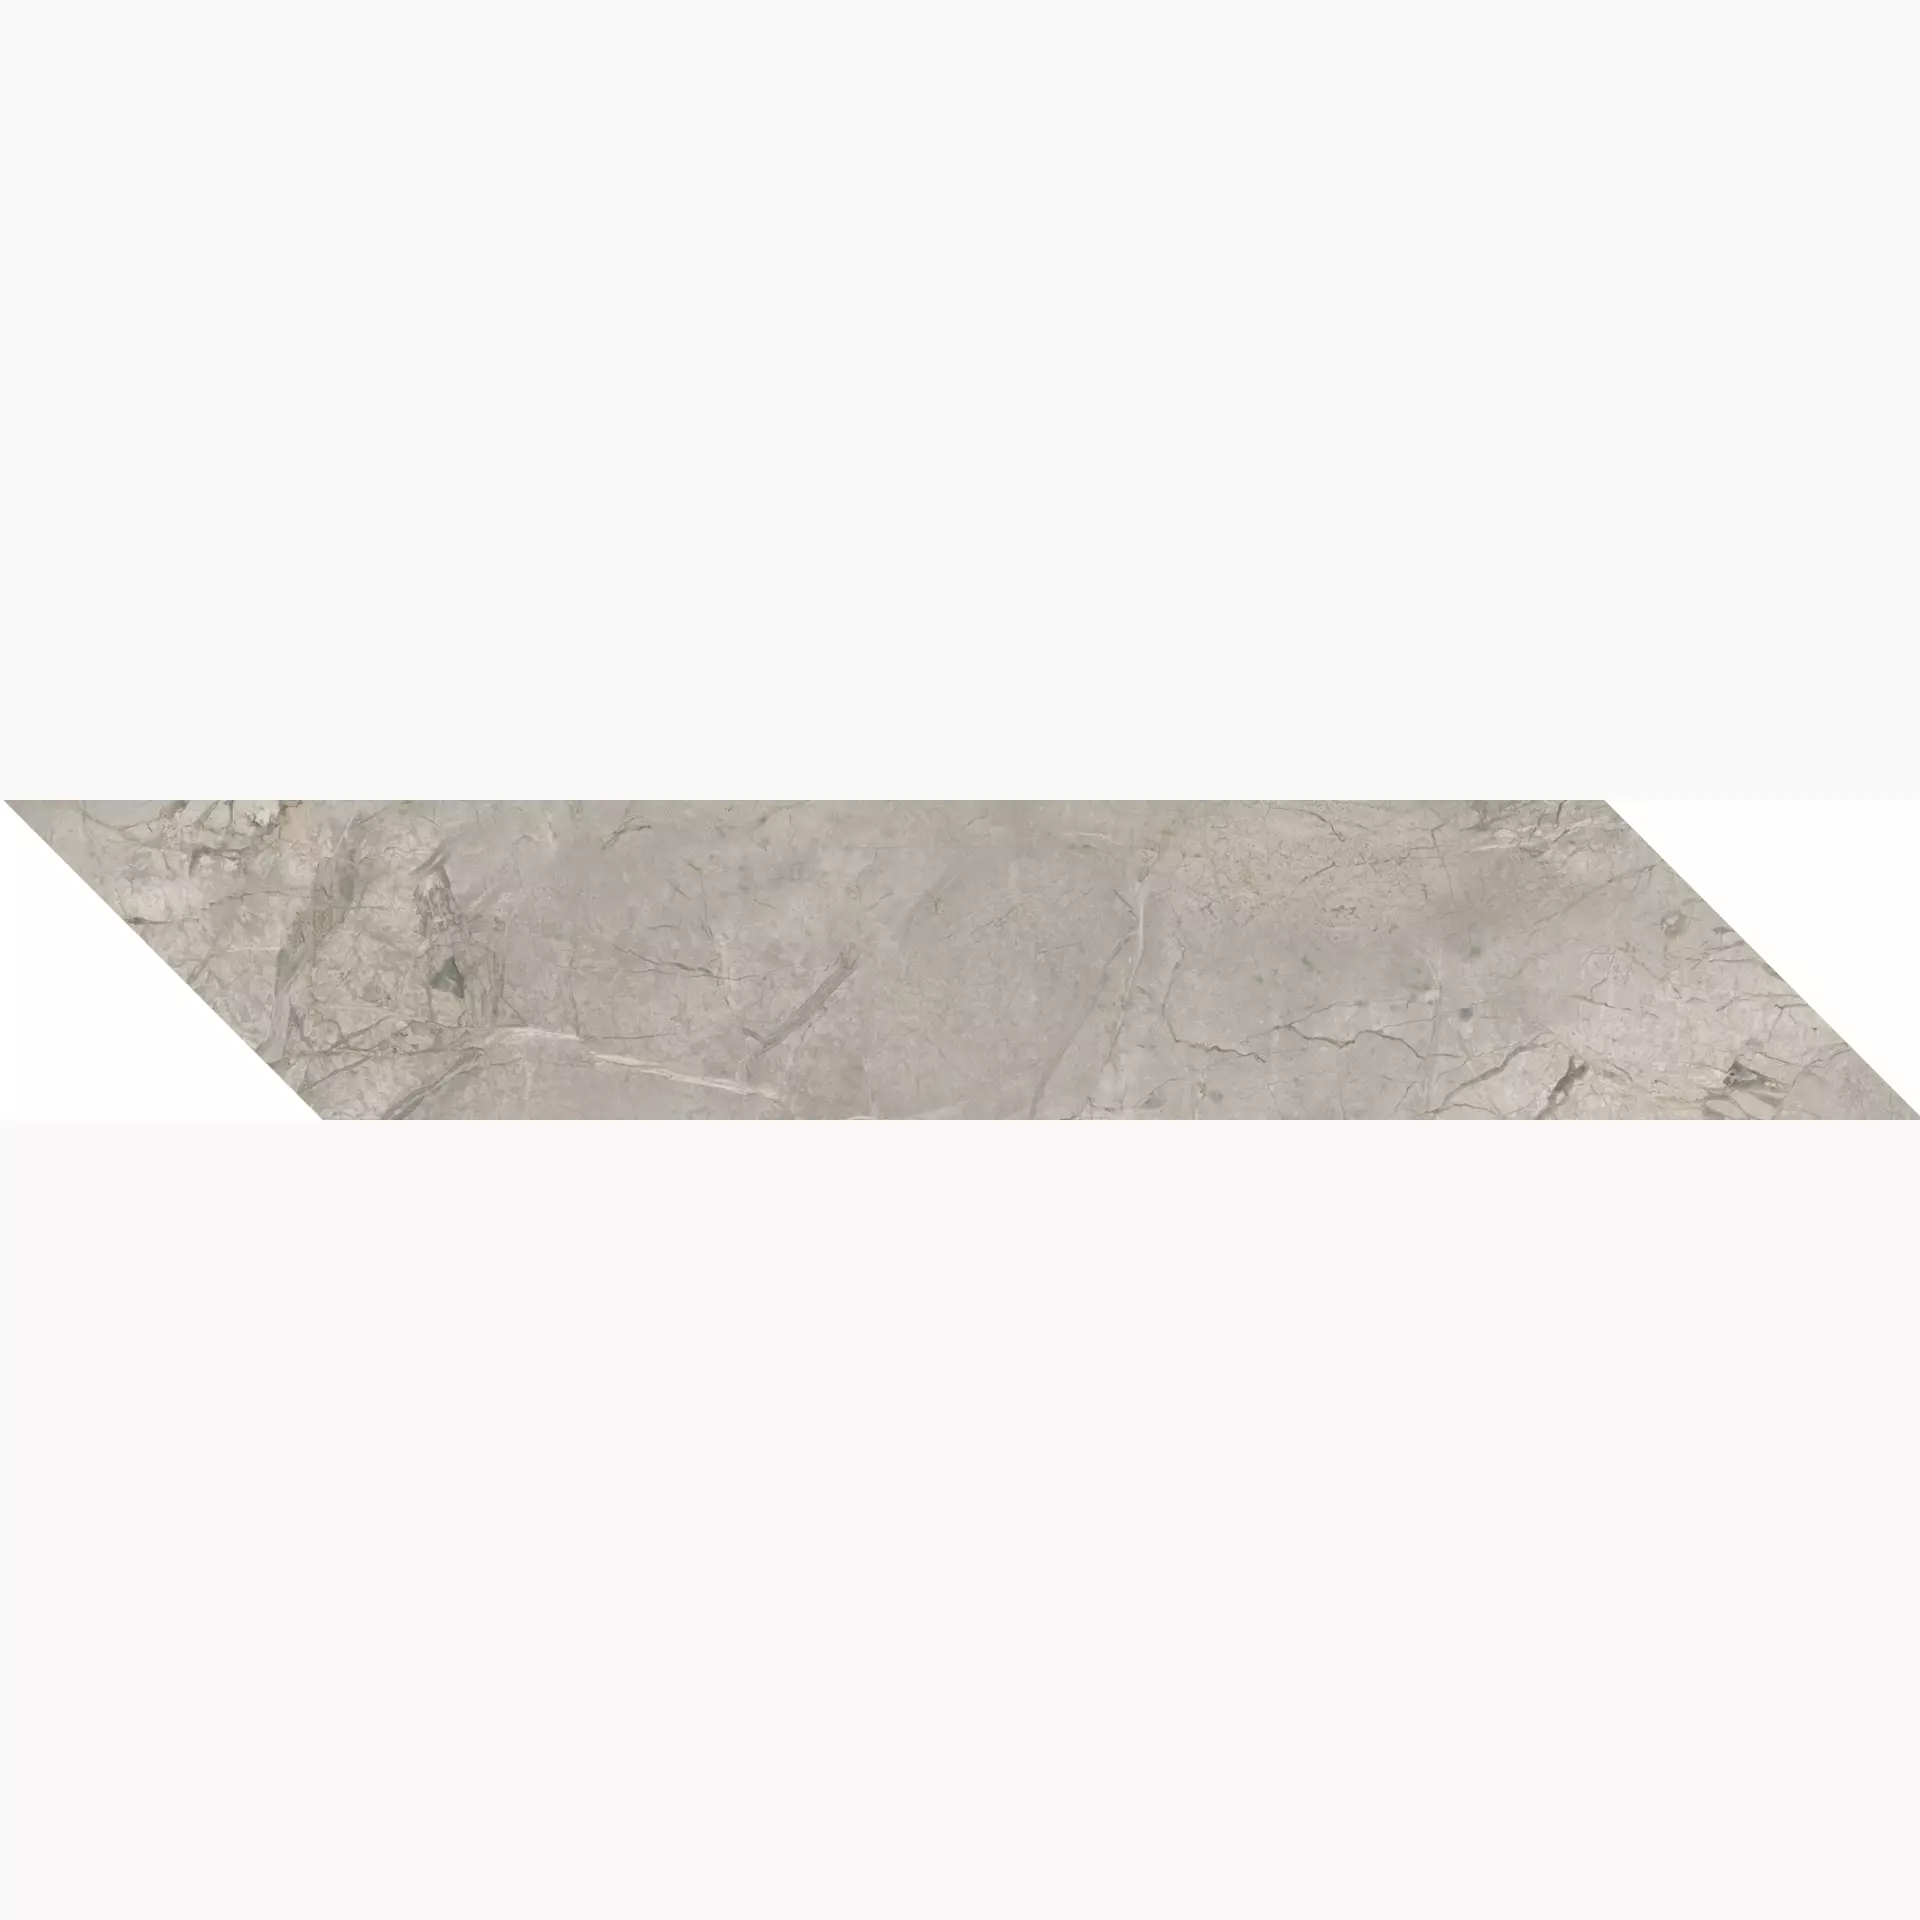 Keope Elements Lux Silver Grey Lappato Chevron Left 43324132 10x60cm rectified 9mm